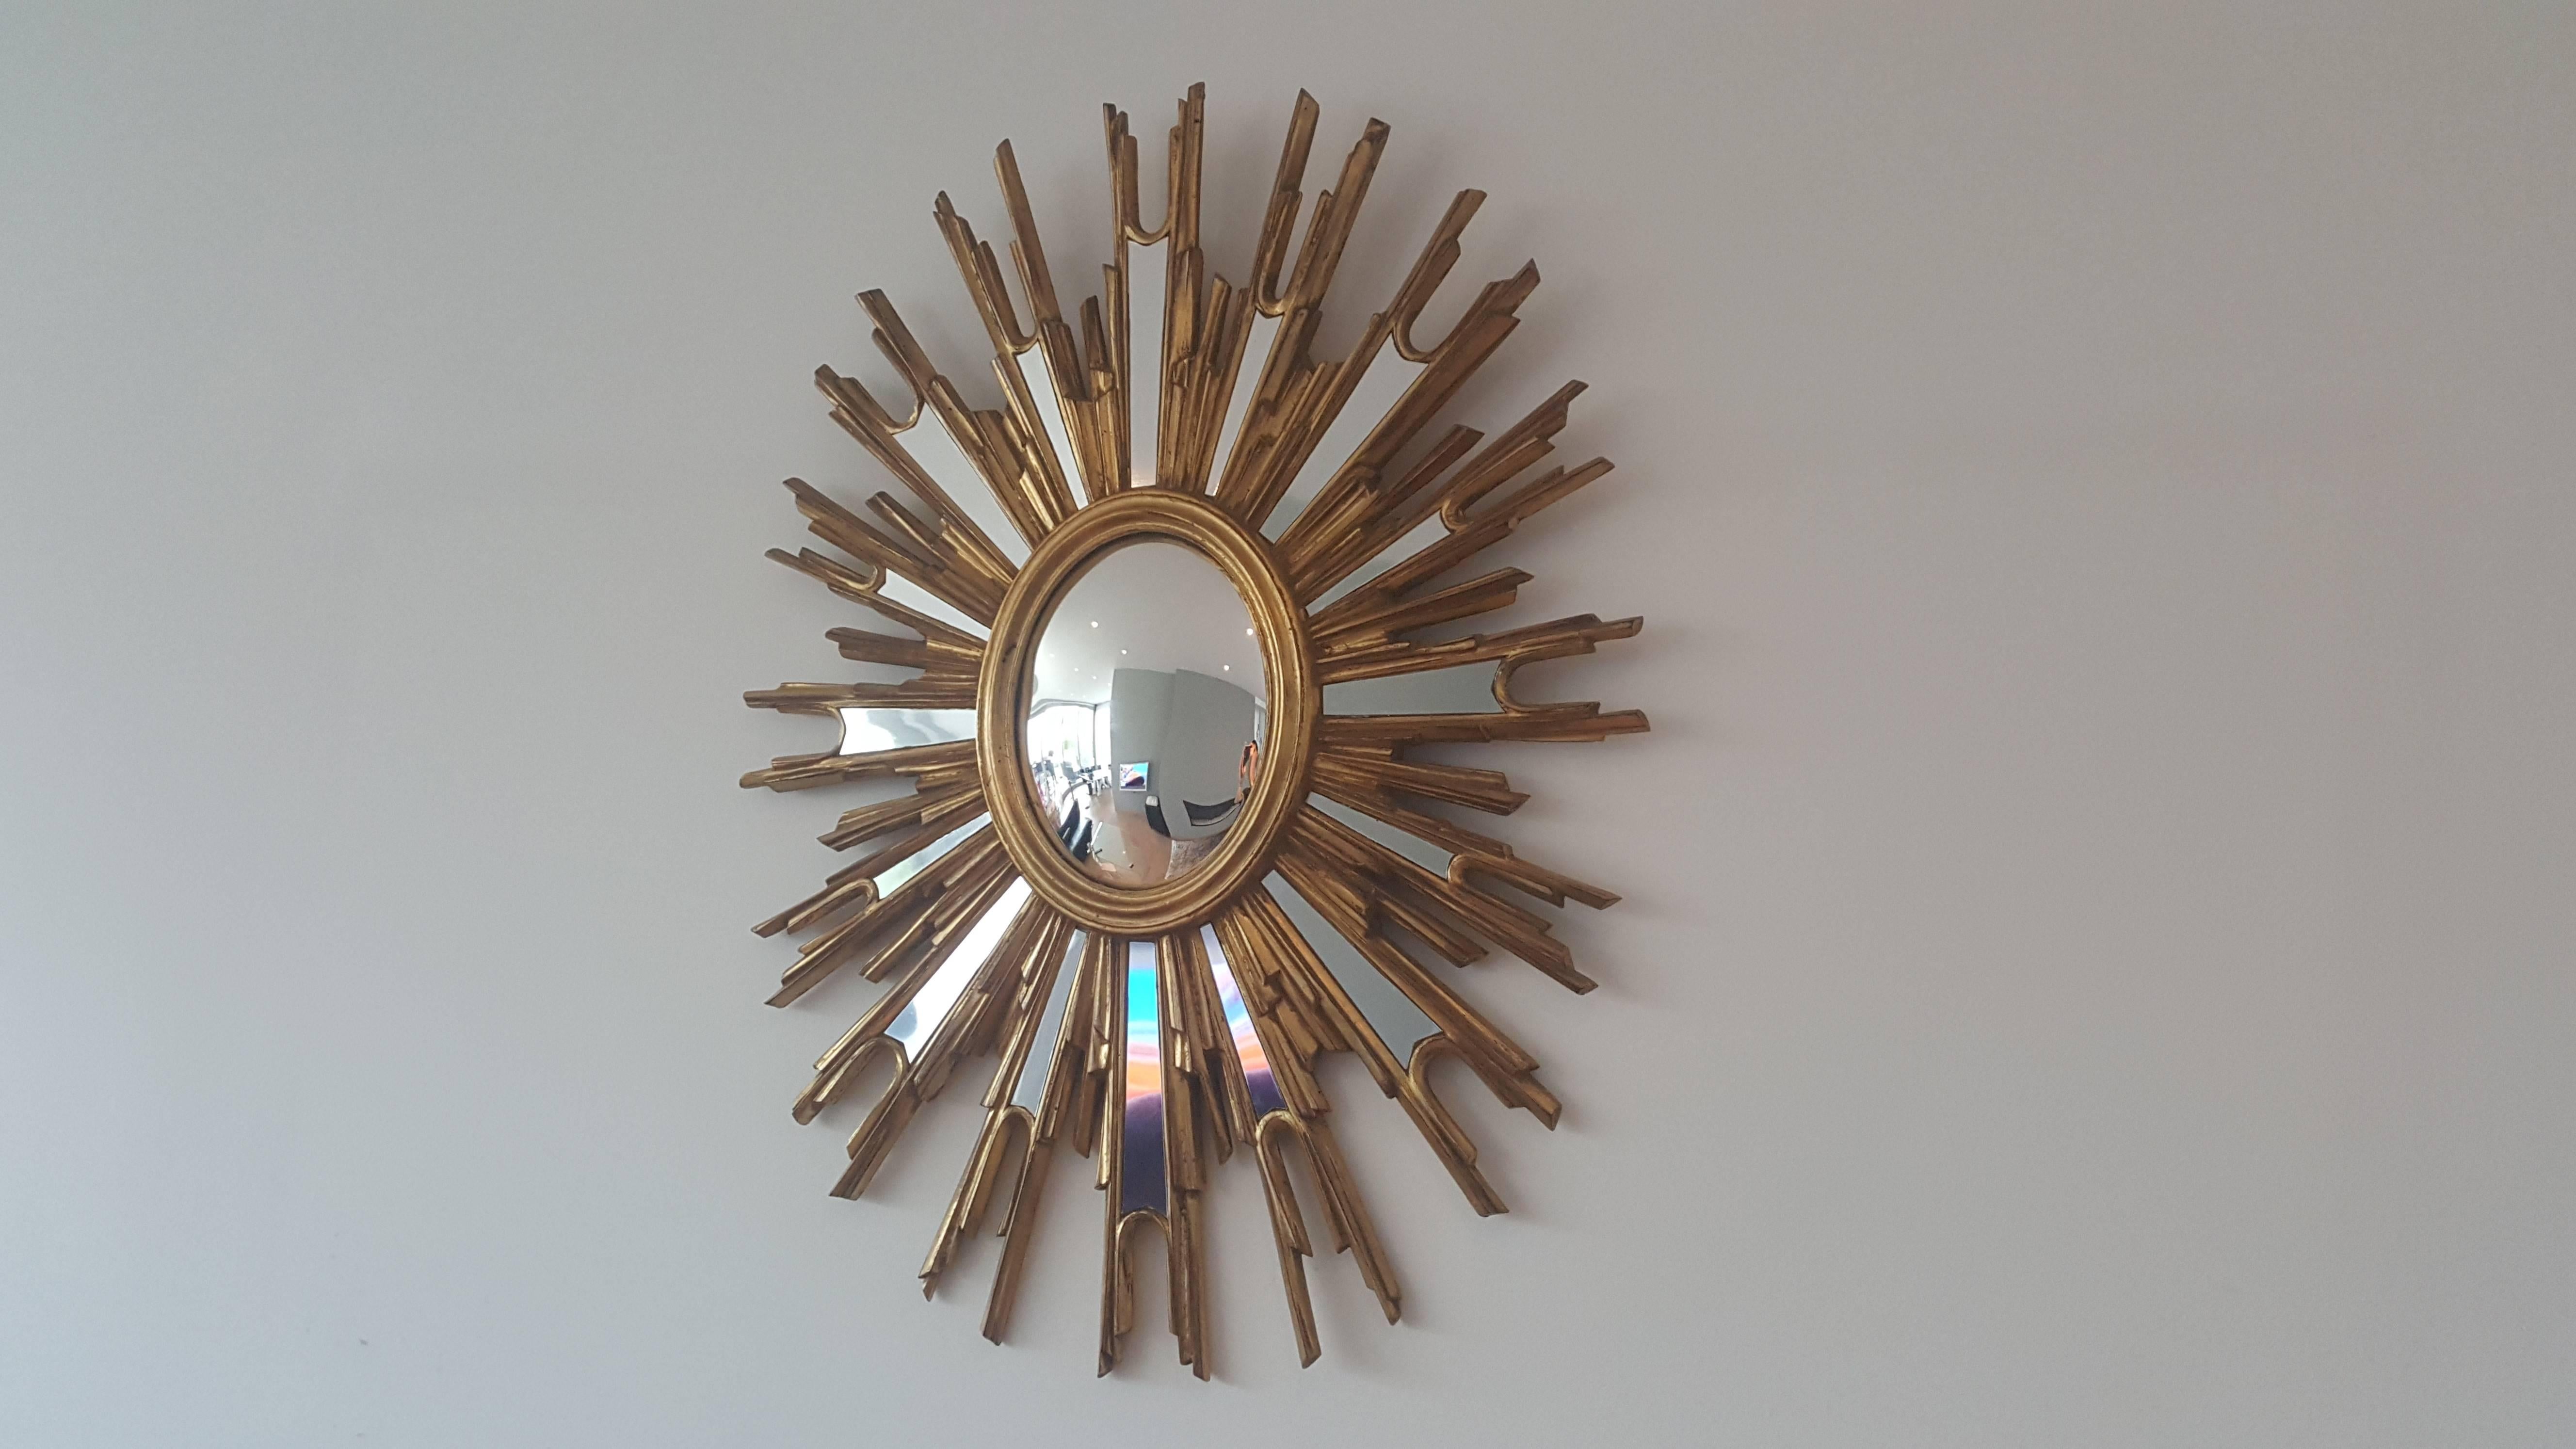 Extra large nice looking French gold sunburst mirror in wood with no defaults.
Made in France in the 1960s.